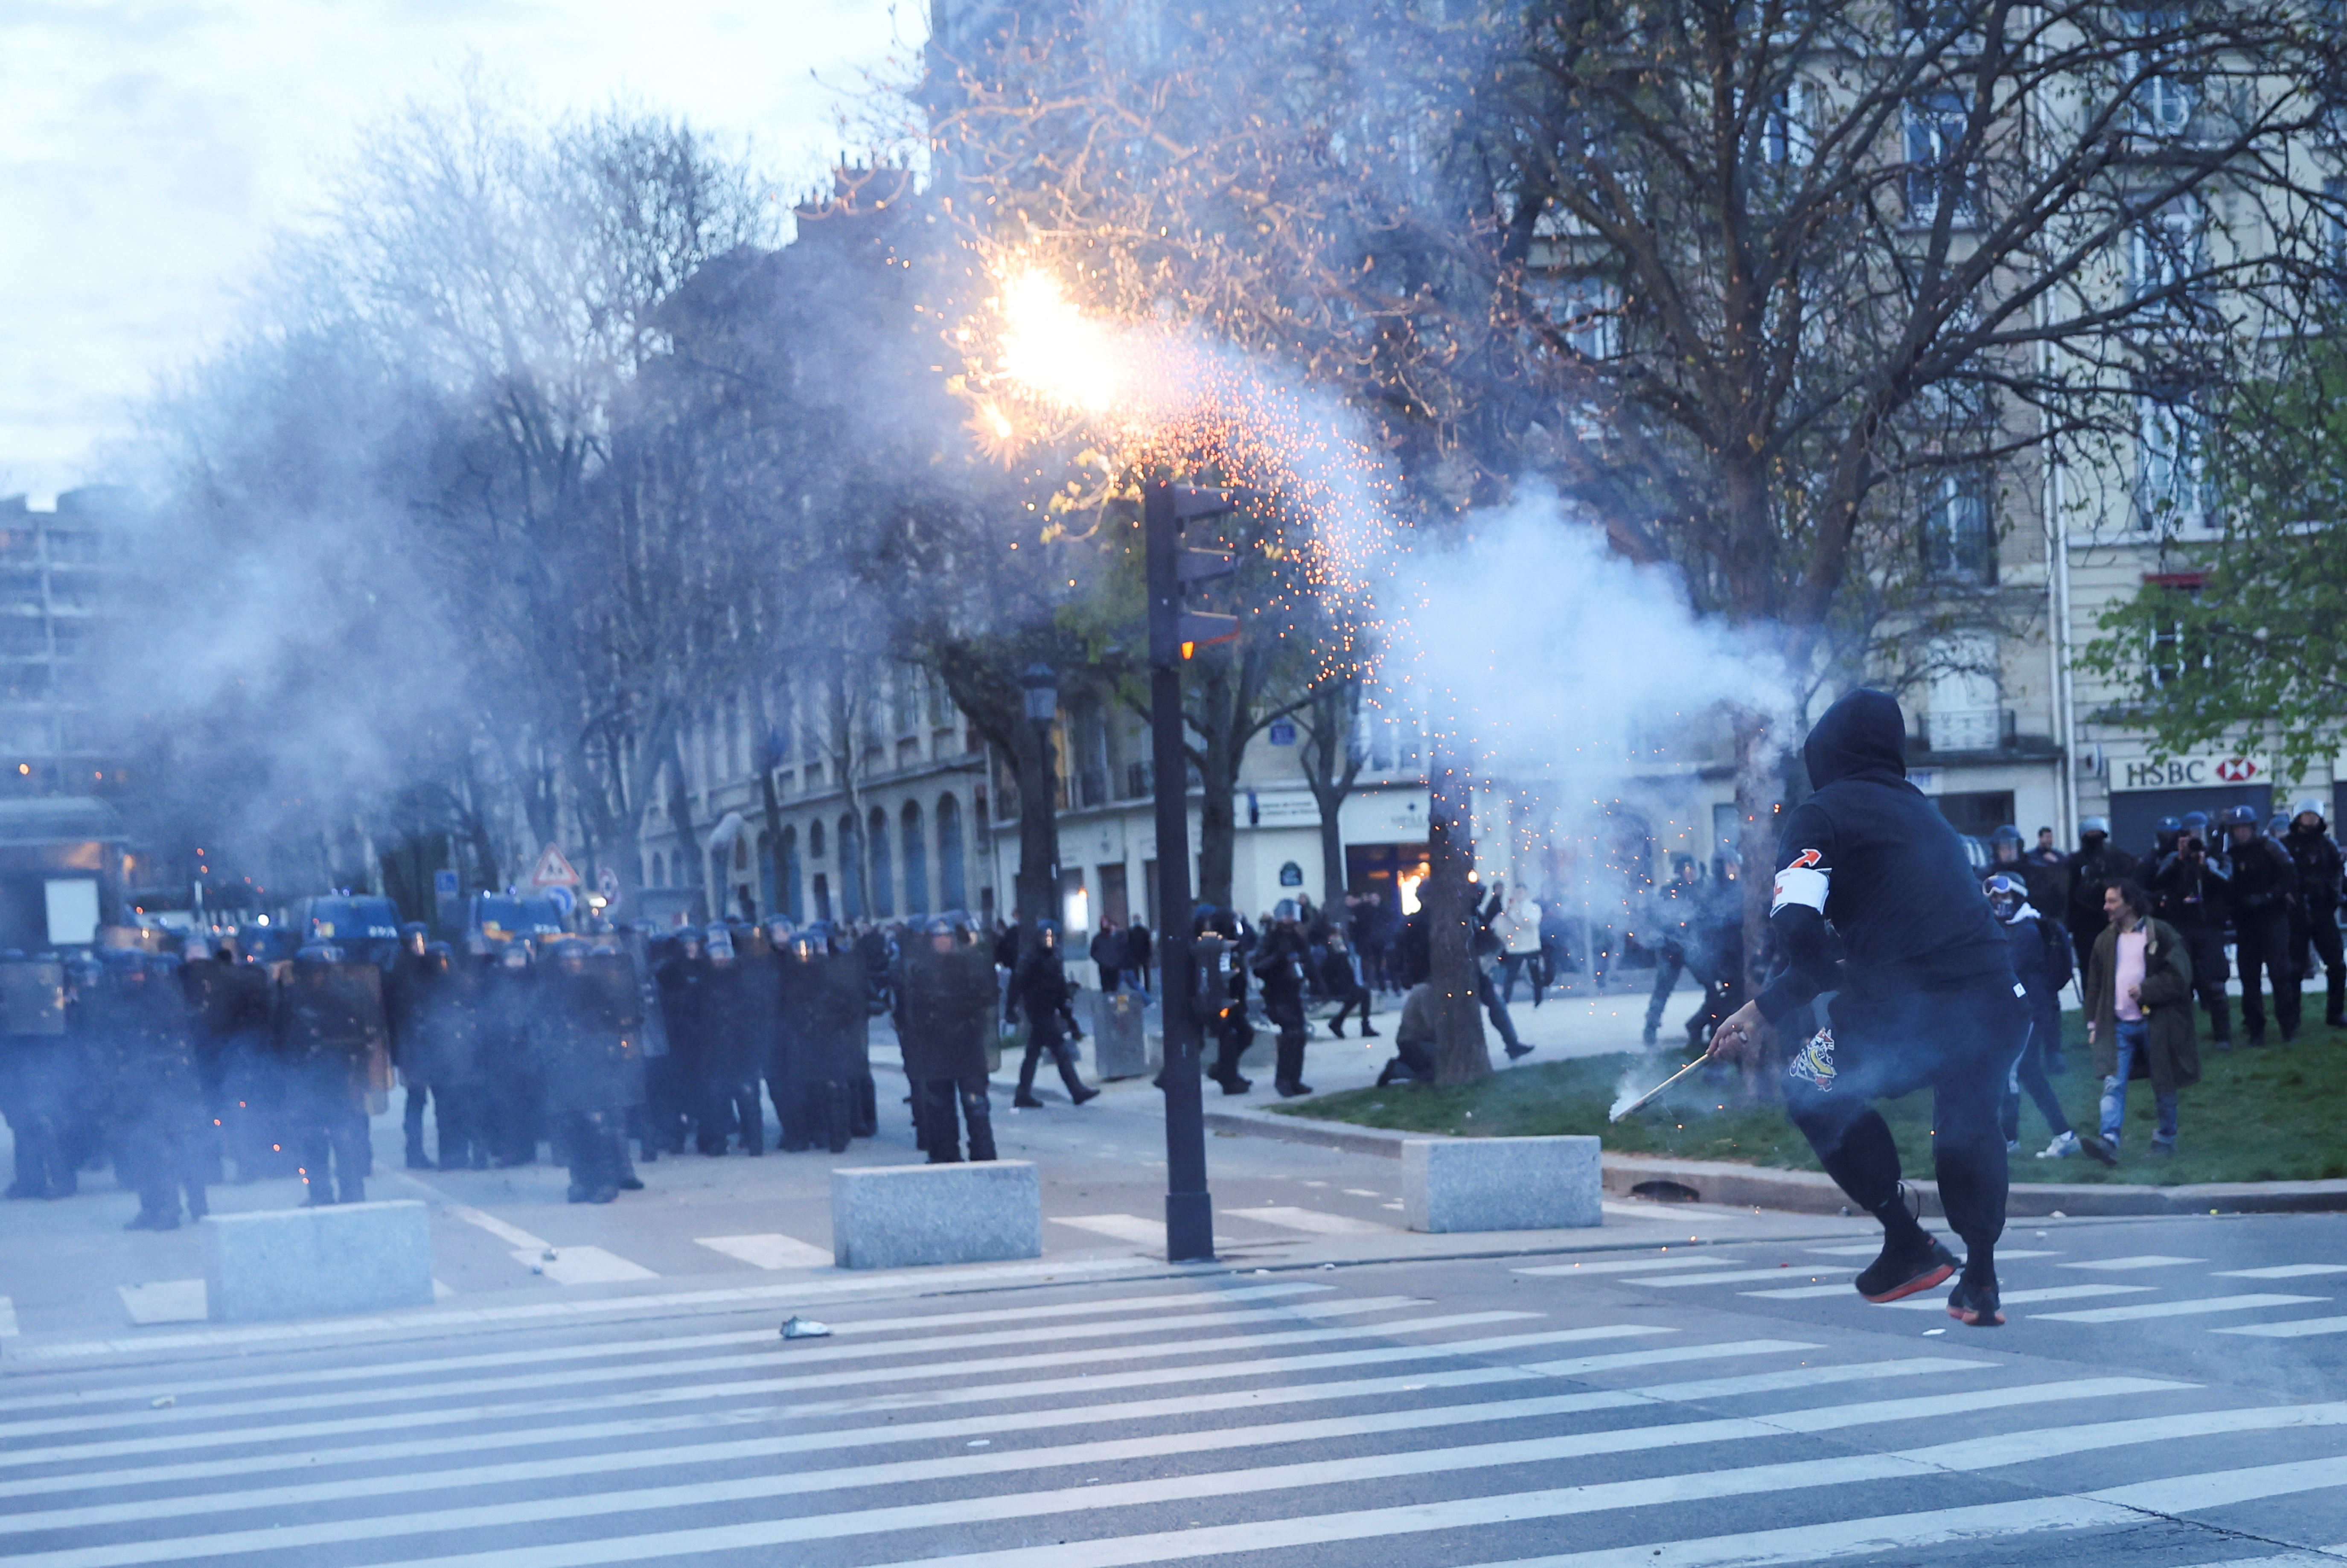 Tenth day of national strike and protest in France against the pension reform